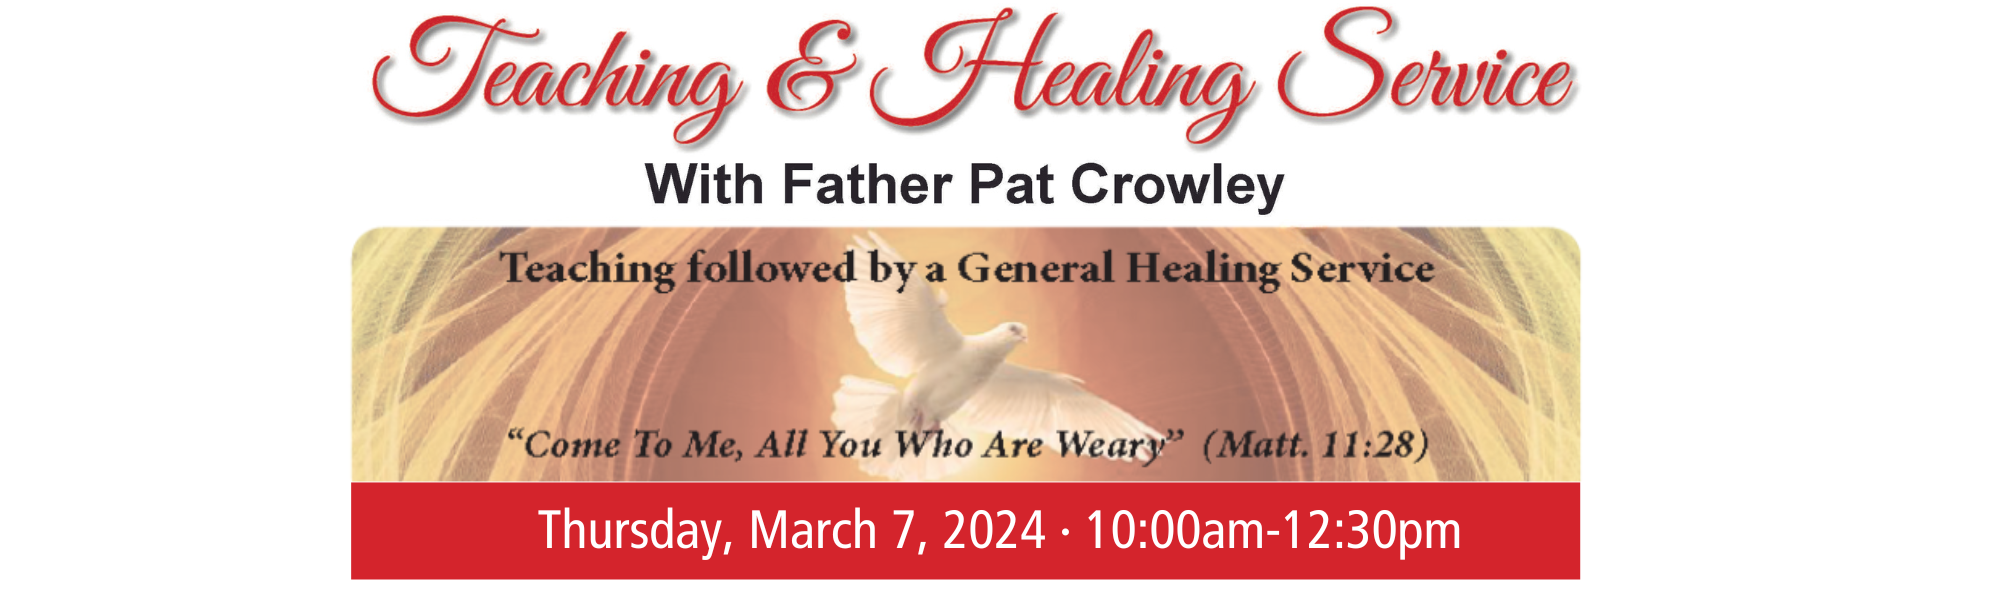 Healing Service with Fr. Crowley Th March 7 2024 10am